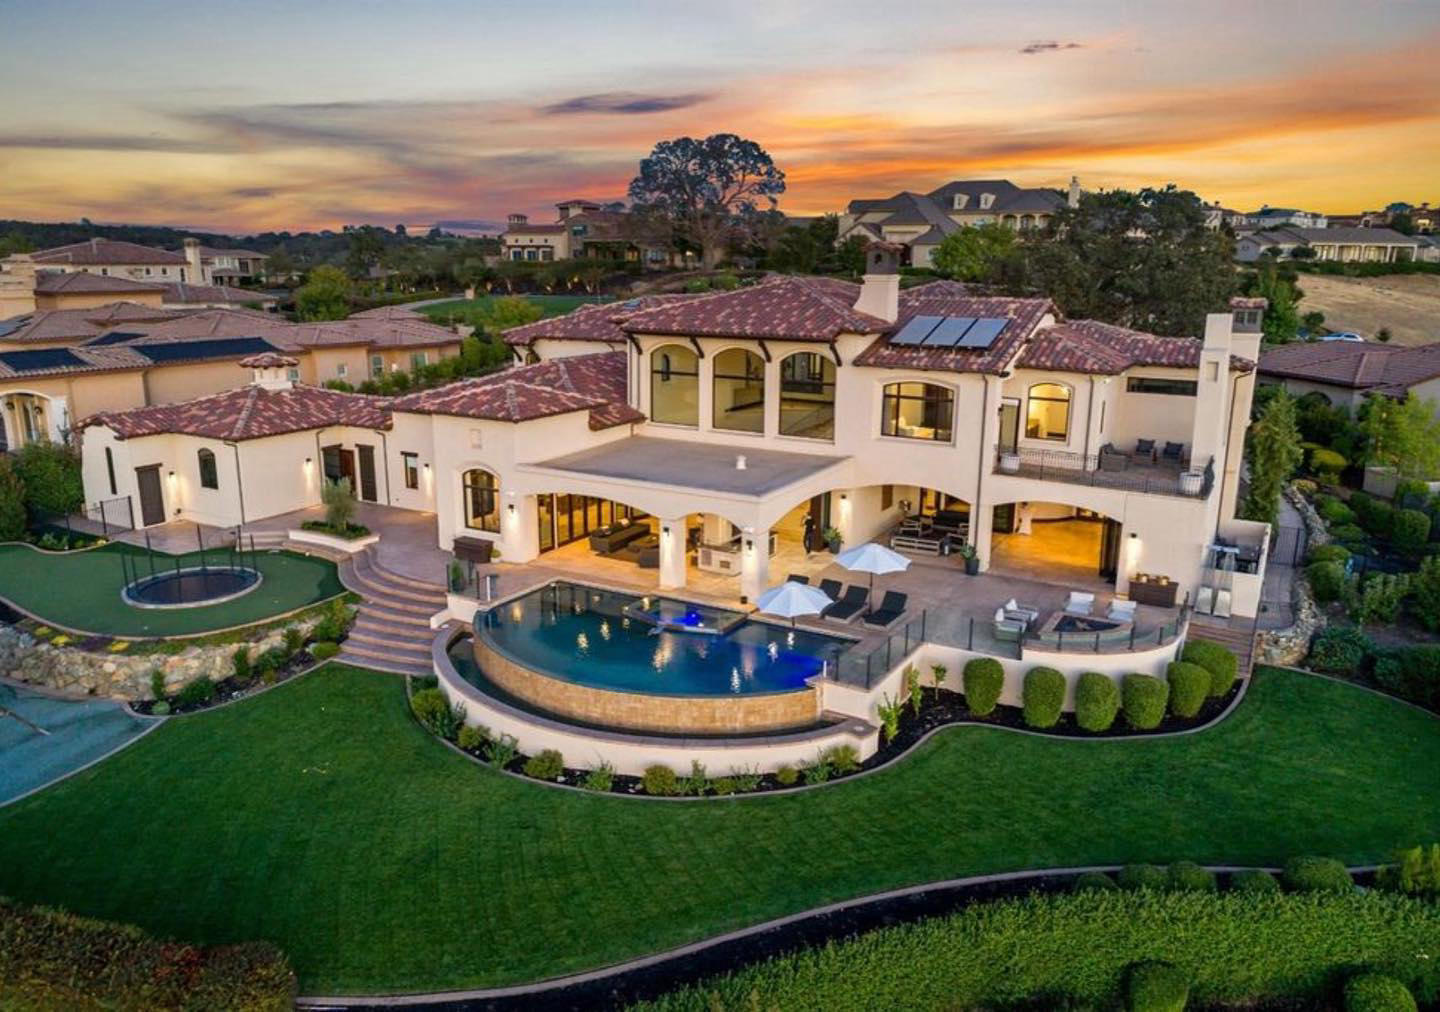 image  1 Another spectacular property on the market in my hometown of El Dorado Hills